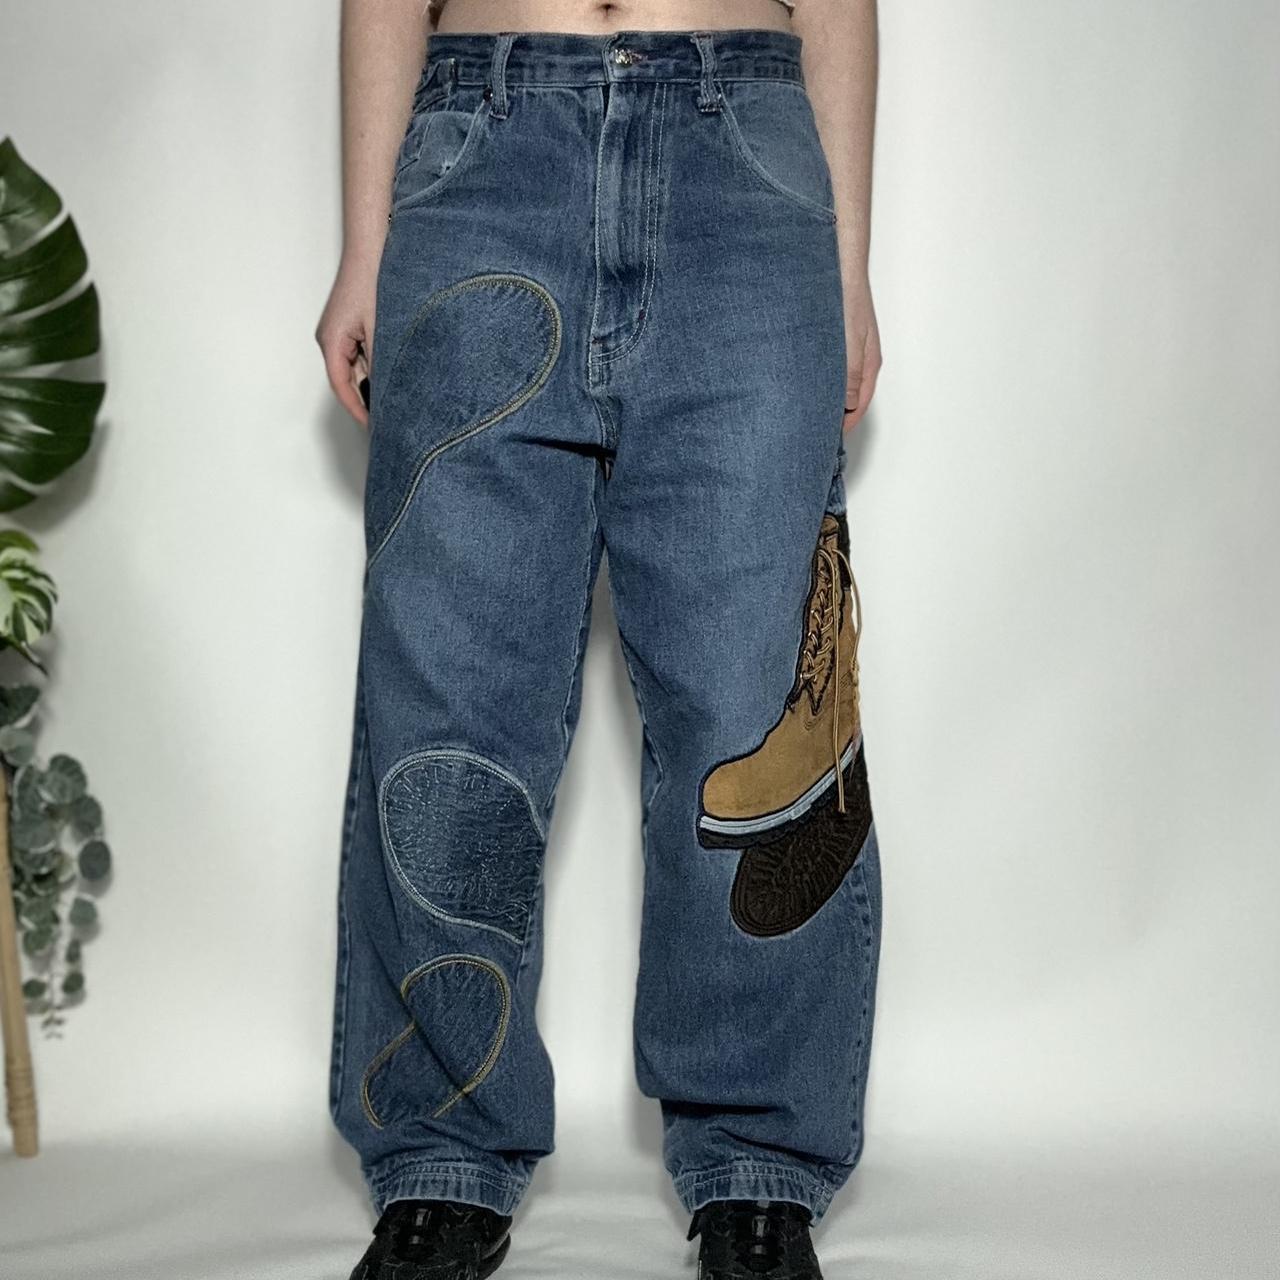 Old School Baggy Jeans | lupon.gov.ph